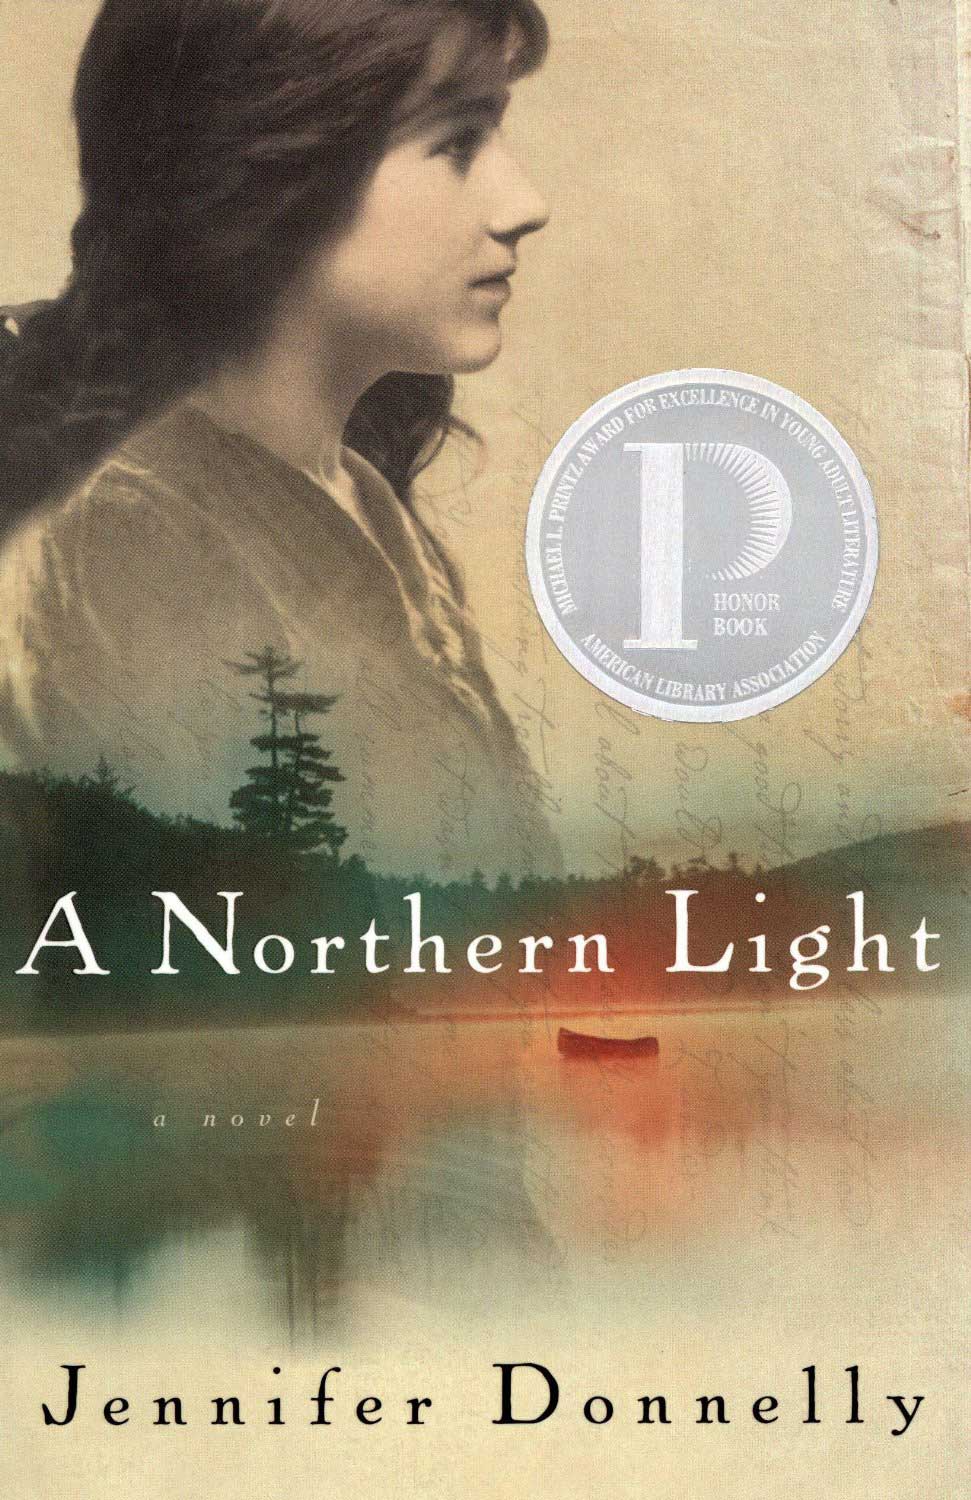 A Northern Light, by Jennifer Donnelly.
                              
                              
                              
                              Against the backdrop of the real life 1906 murder of Grace Brown in upstate New York, fictional Mattie Gokey struggles to decide between staying in her impoverished farming community or escaping to college in New York City.
                              
                              
                              
                              Buy now: A Northern Light